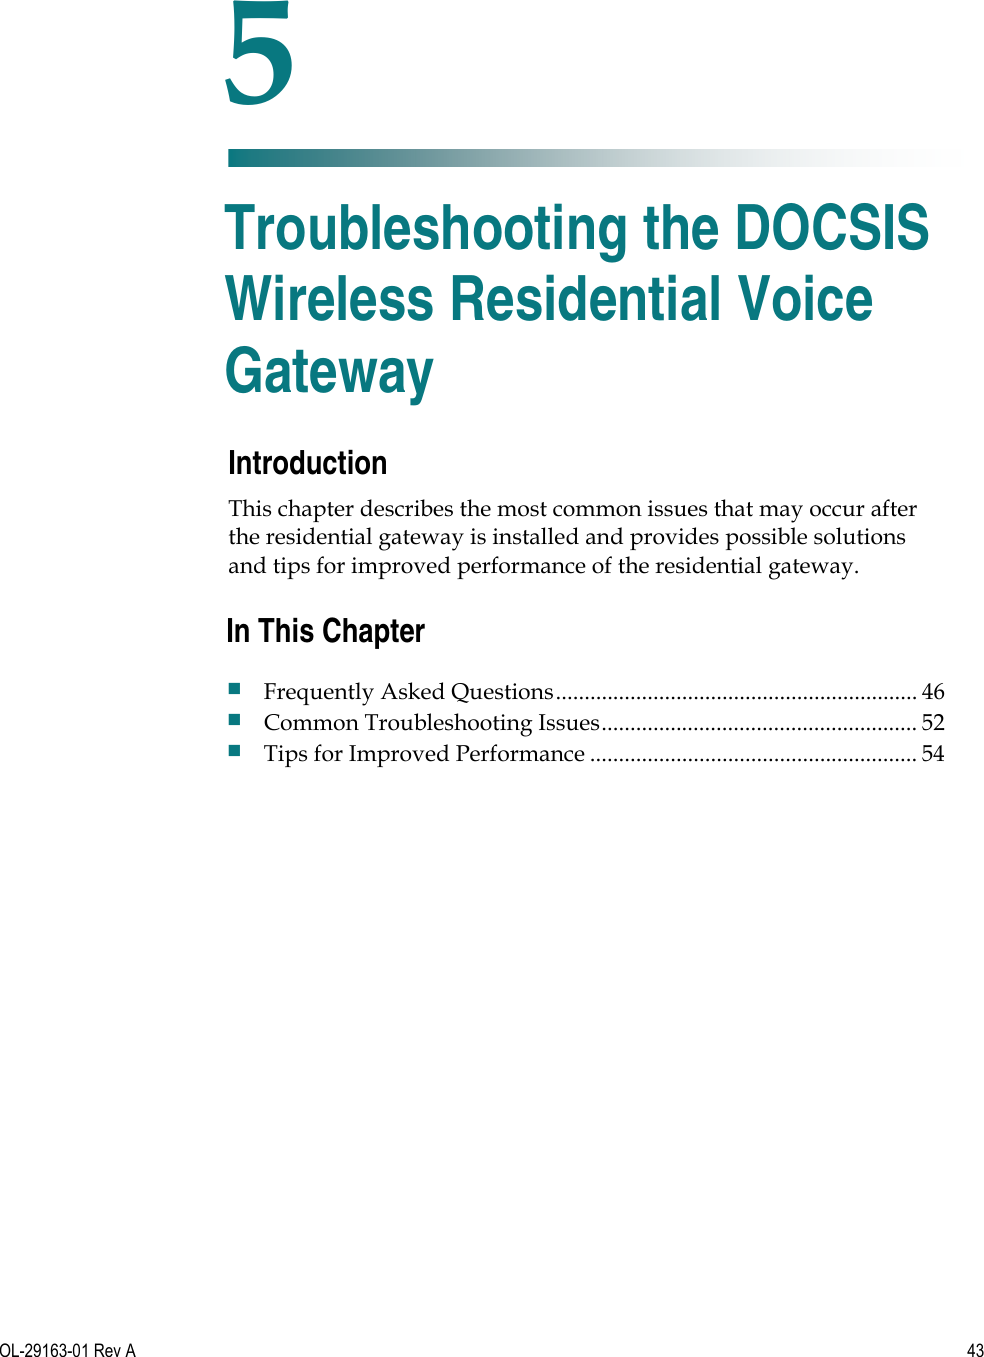   OL-29163-01 Rev A  43  Introduction This chapter describes the most common issues that may occur after the residential gateway is installed and provides possible solutions and tips for improved performance of the residential gateway.     5 Chapter 5 Troubleshooting the DOCSIS Wireless Residential Voice Gateway In This Chapter  Frequently Asked Questions ............................................................... 46  Common Troubleshooting Issues ....................................................... 52  Tips for Improved Performance ......................................................... 54 